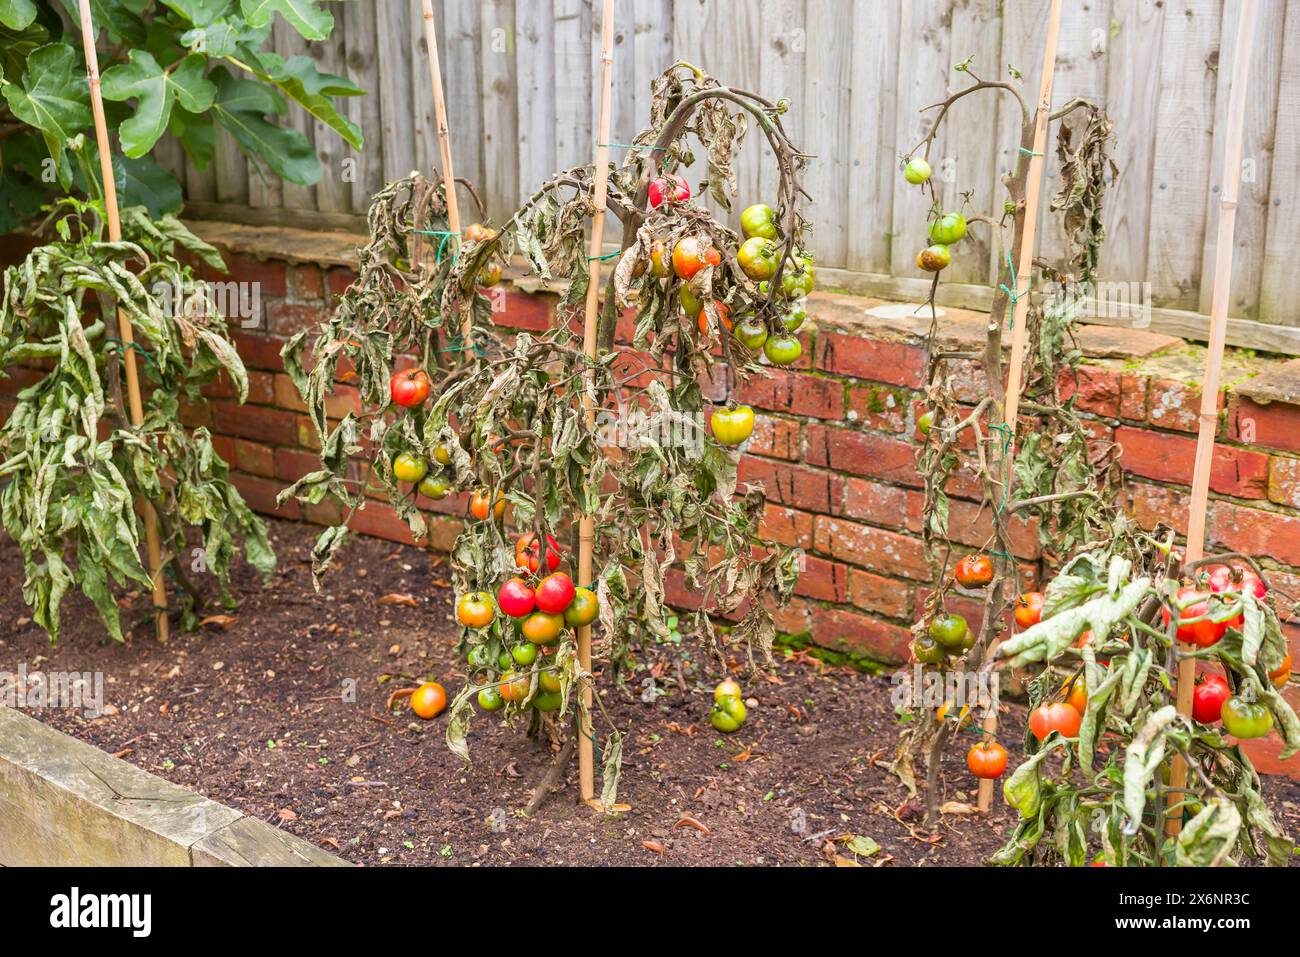 Vine tomato plants wilted with blight disease growing in a UK garden Stock Photo